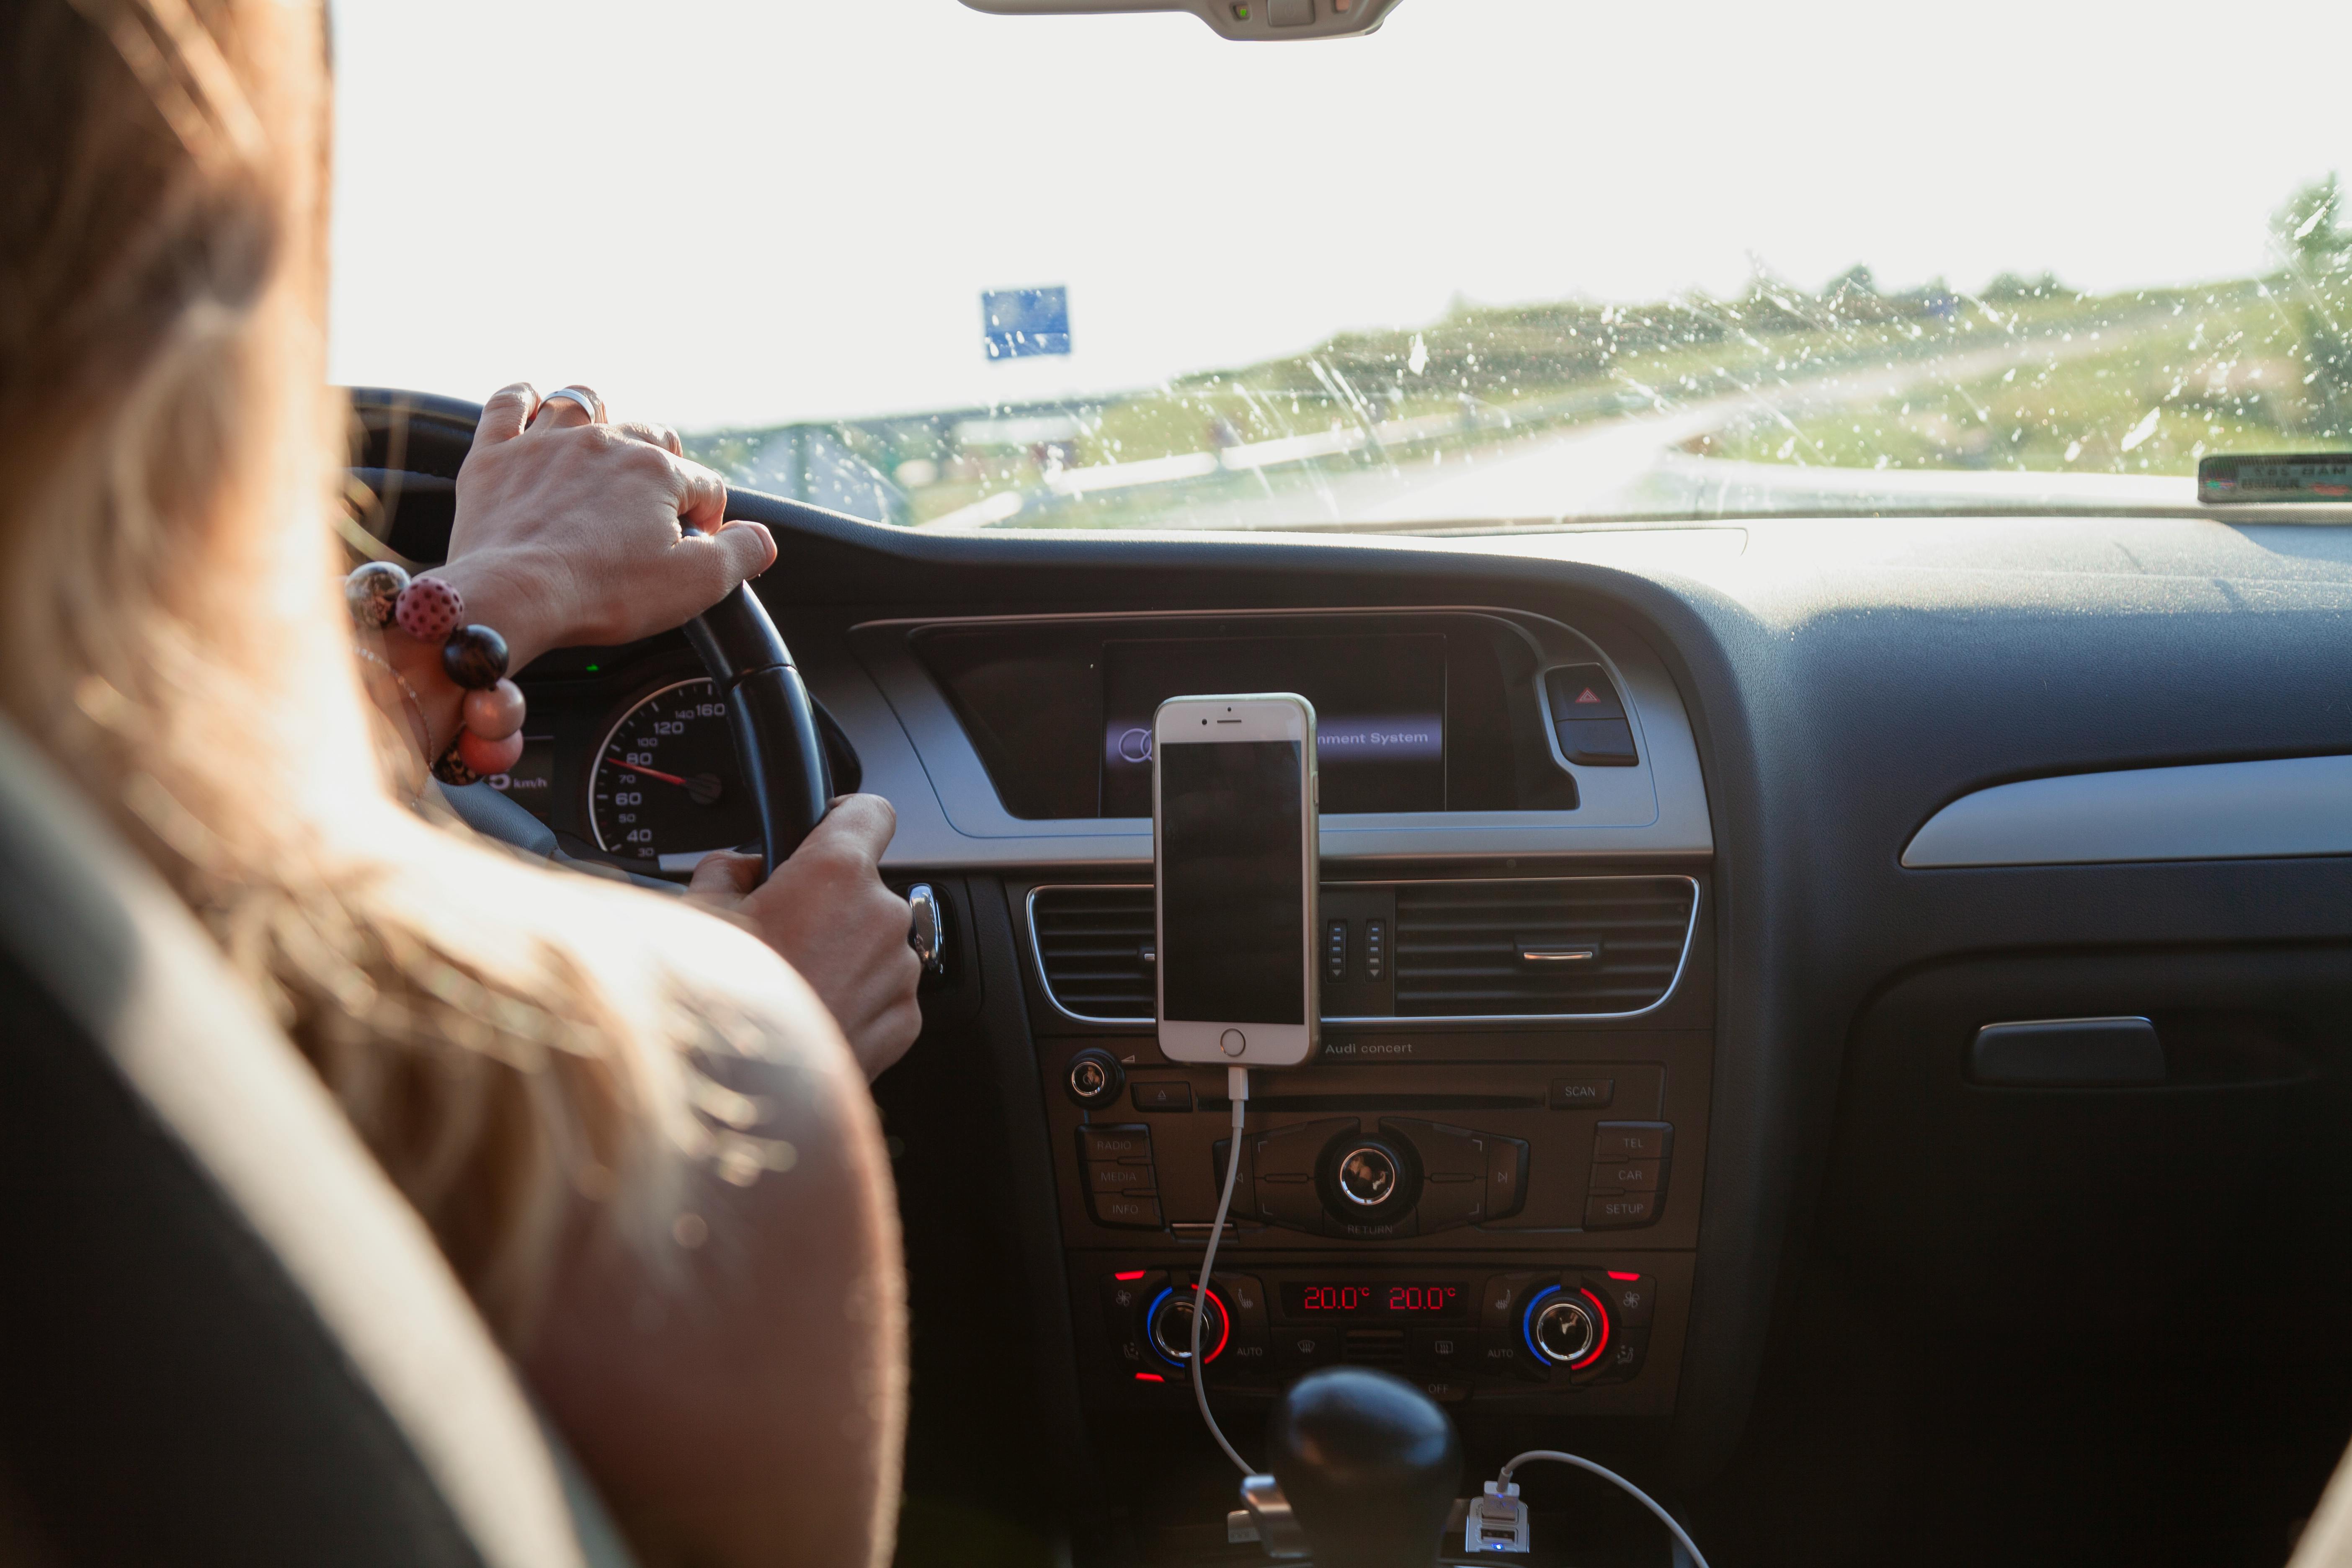 A woman driving with her phone docked in her car | Source: Pexels